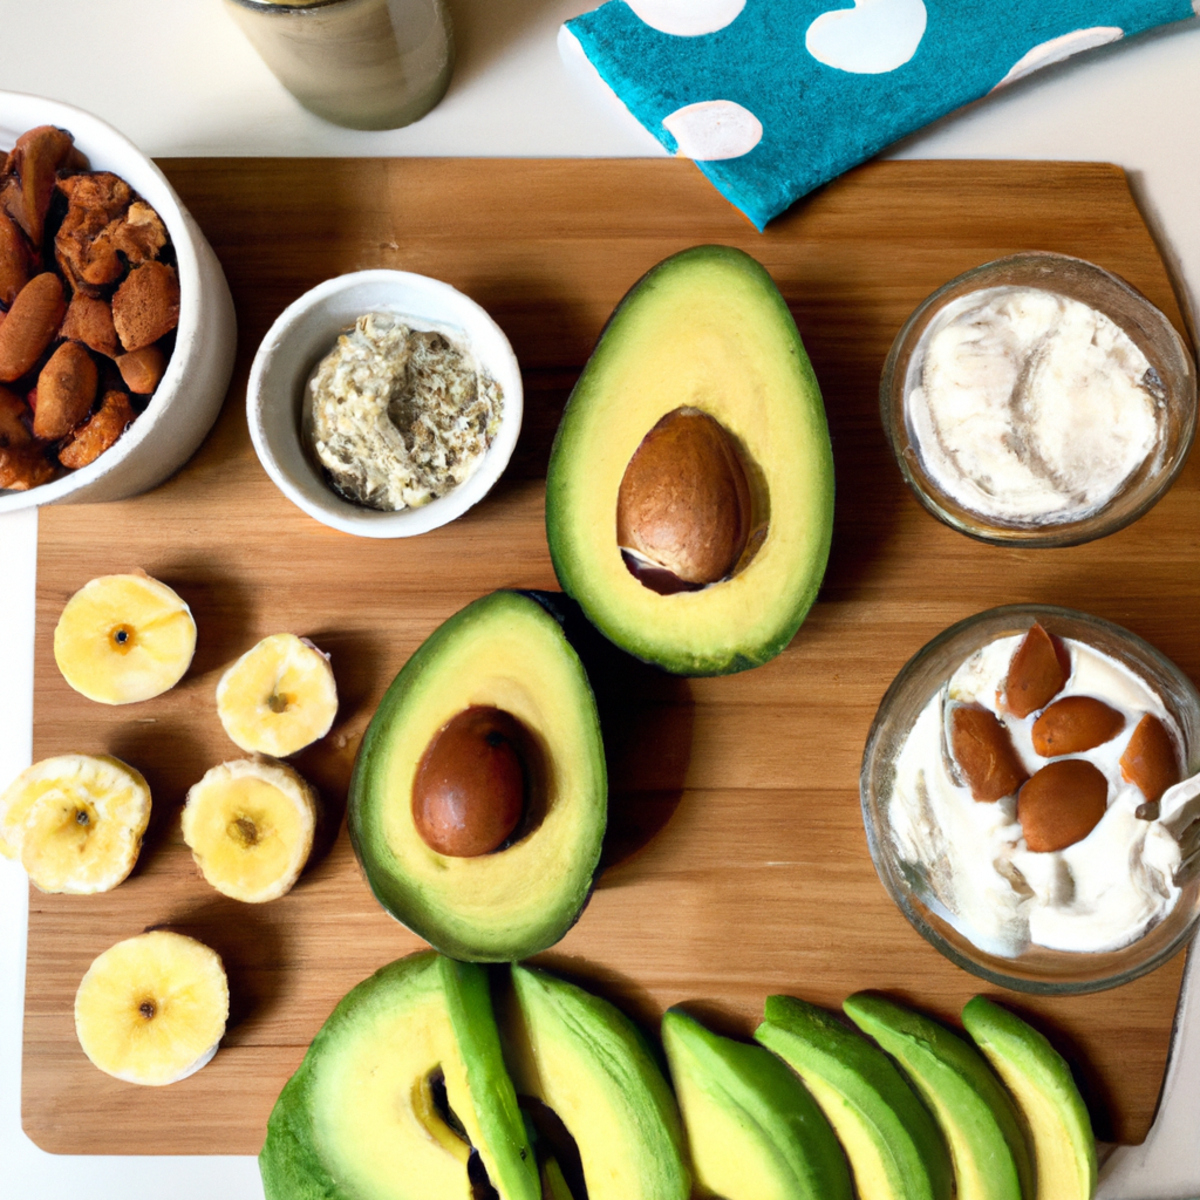 The photo features a colorful array of nutrient-packed snacks arranged on a wooden cutting board. In the center of the photo, a ripe avocado is sliced in half, revealing its creamy green flesh. Surrounding the avocado are several other healthy options, including a handful of almonds, a sliced apple, a small container of Greek yogurt, and a few squares of dark chocolate. The photo is expertly lit, with natural light casting a warm glow over the scene, making the snacks look even more appetizing. The composition is simple yet effective, showcasing the variety of foods that can help optimize a workout.